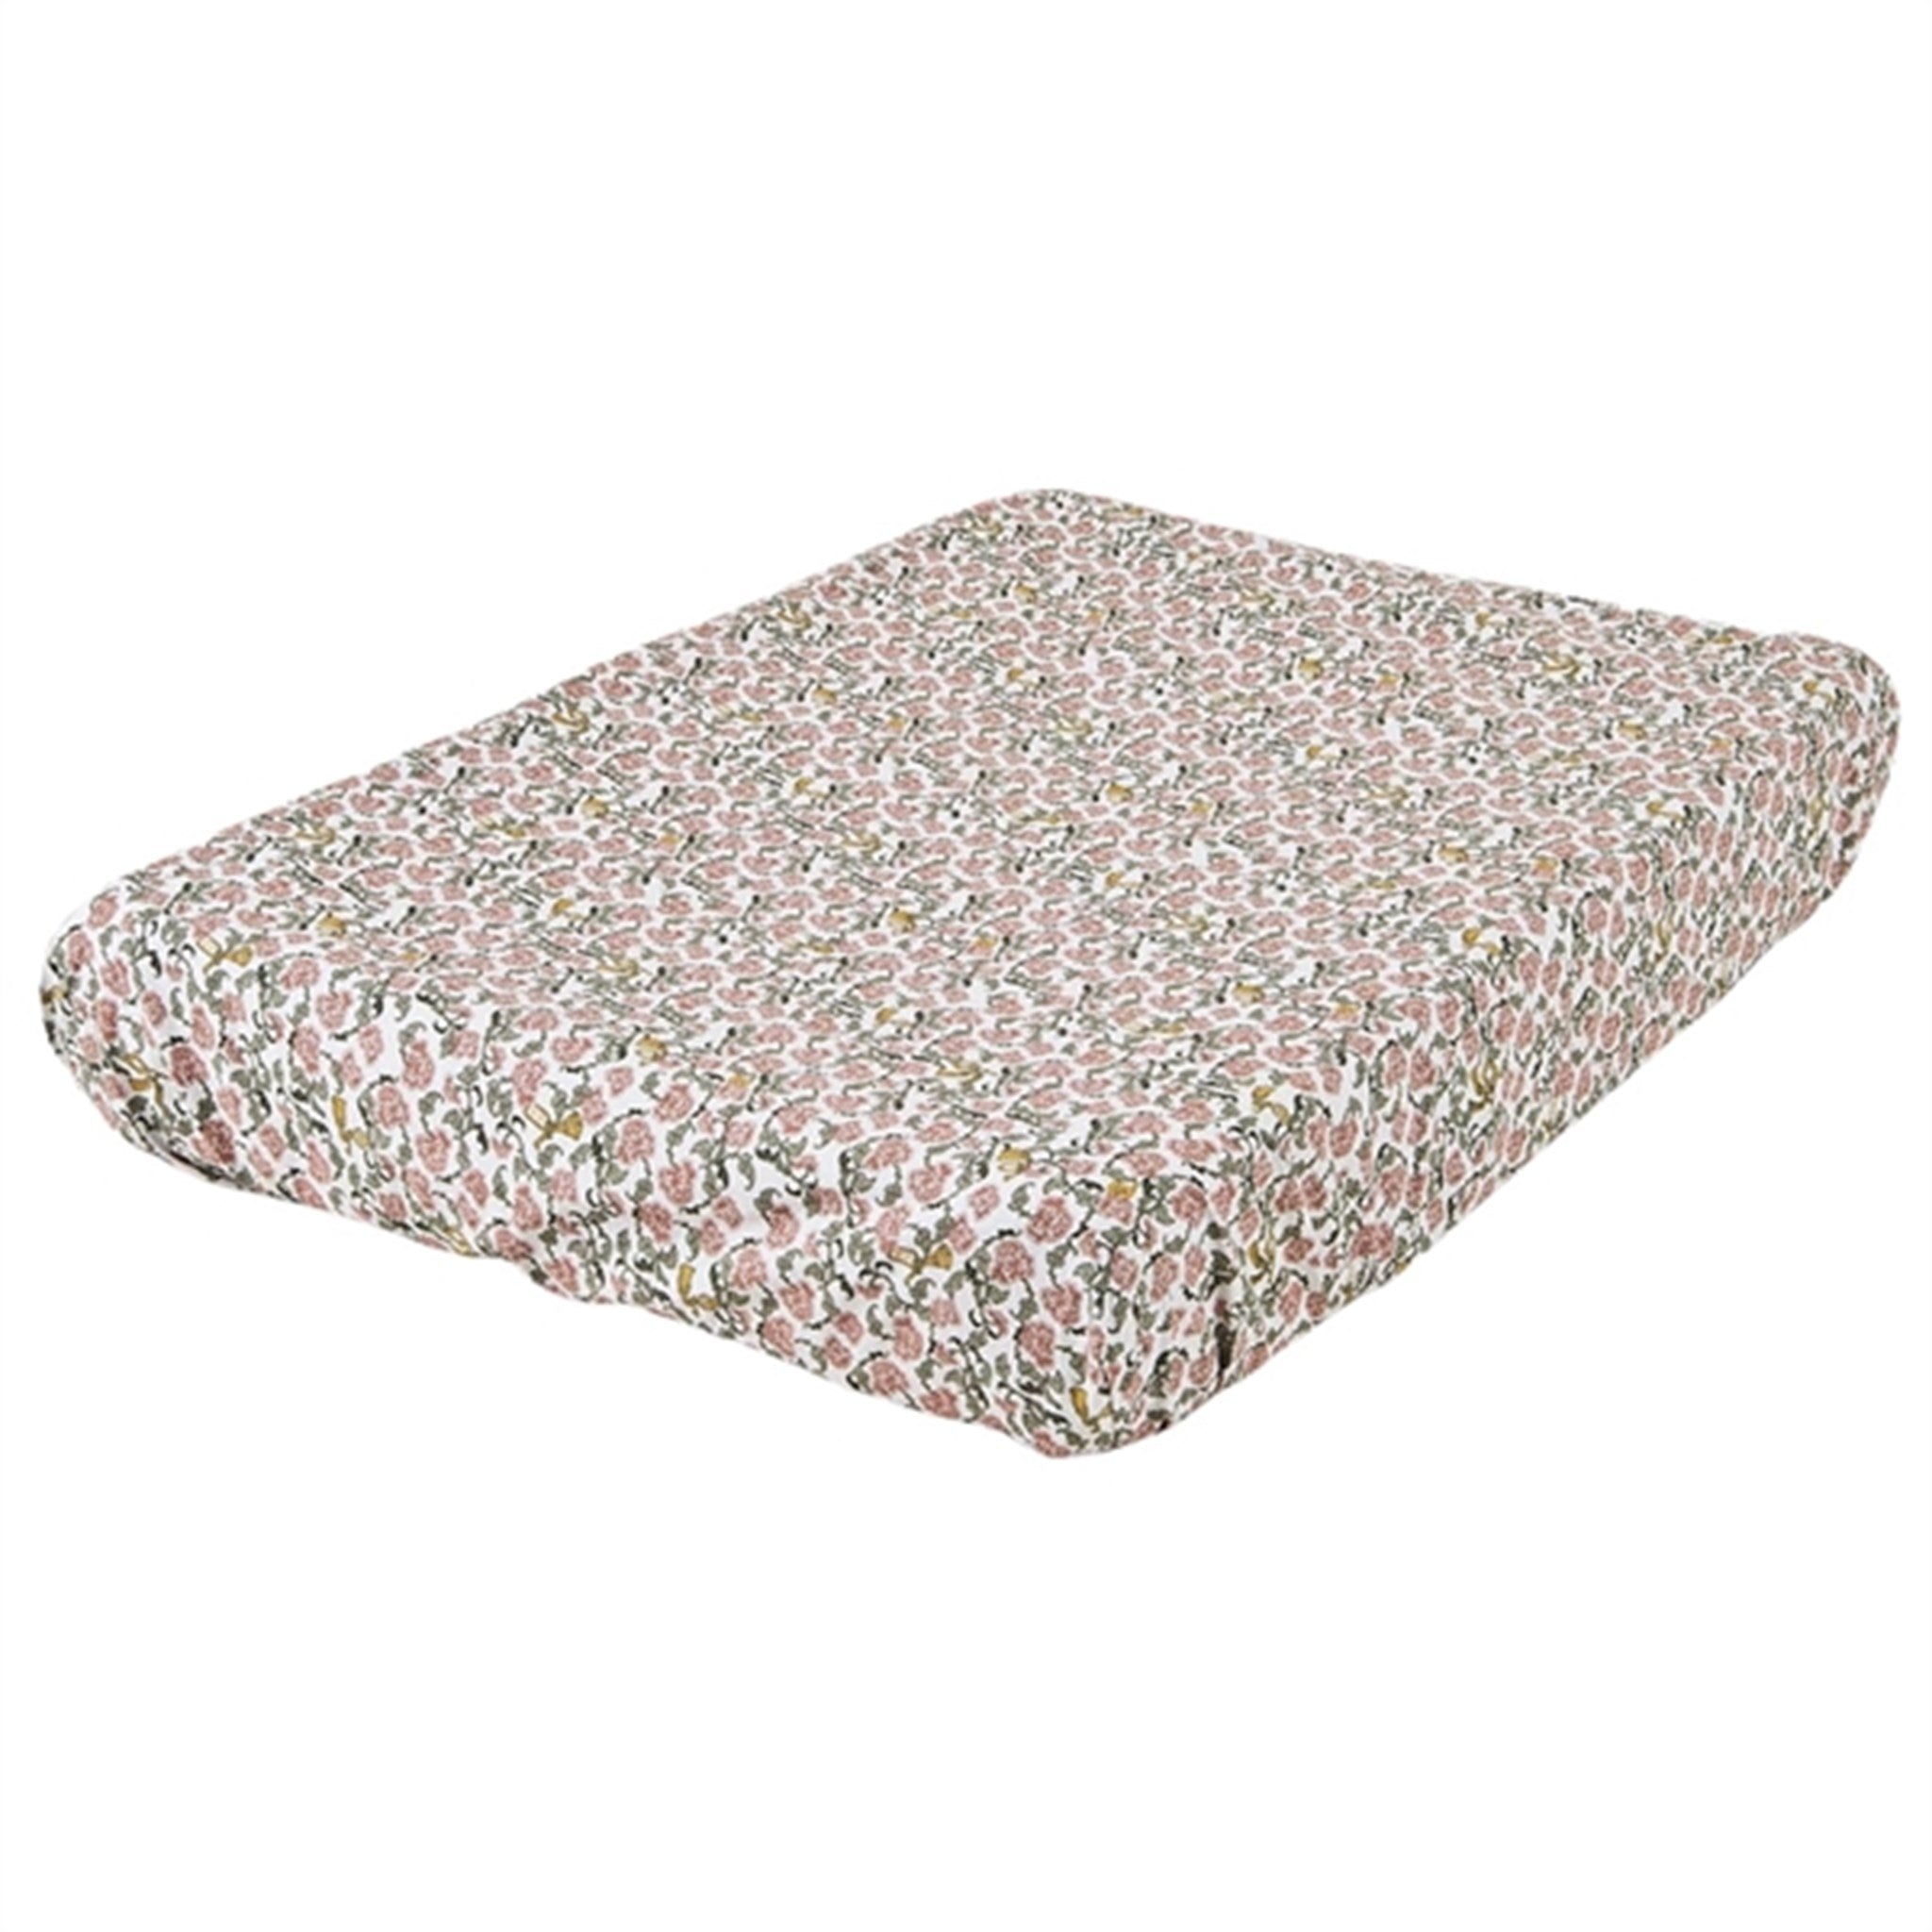 Garbo&Friends Percale Changing Mat Cover Floral Vine